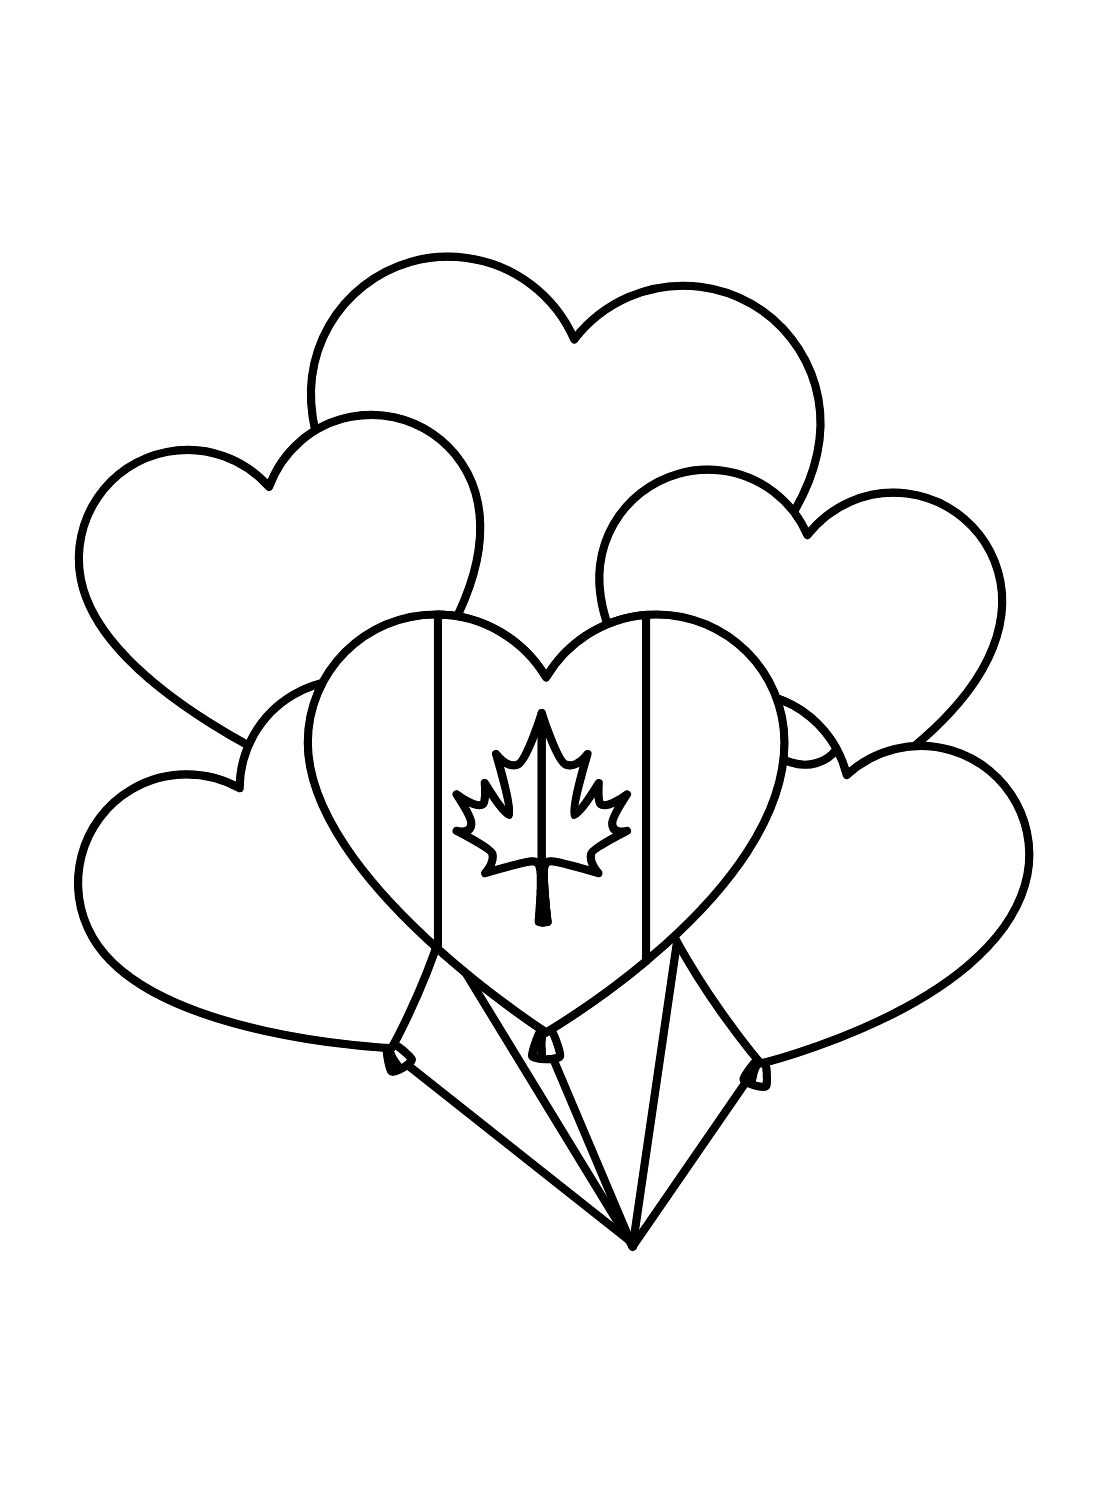 Balloons with Canadian Flag and Heart Shape Coloring Page